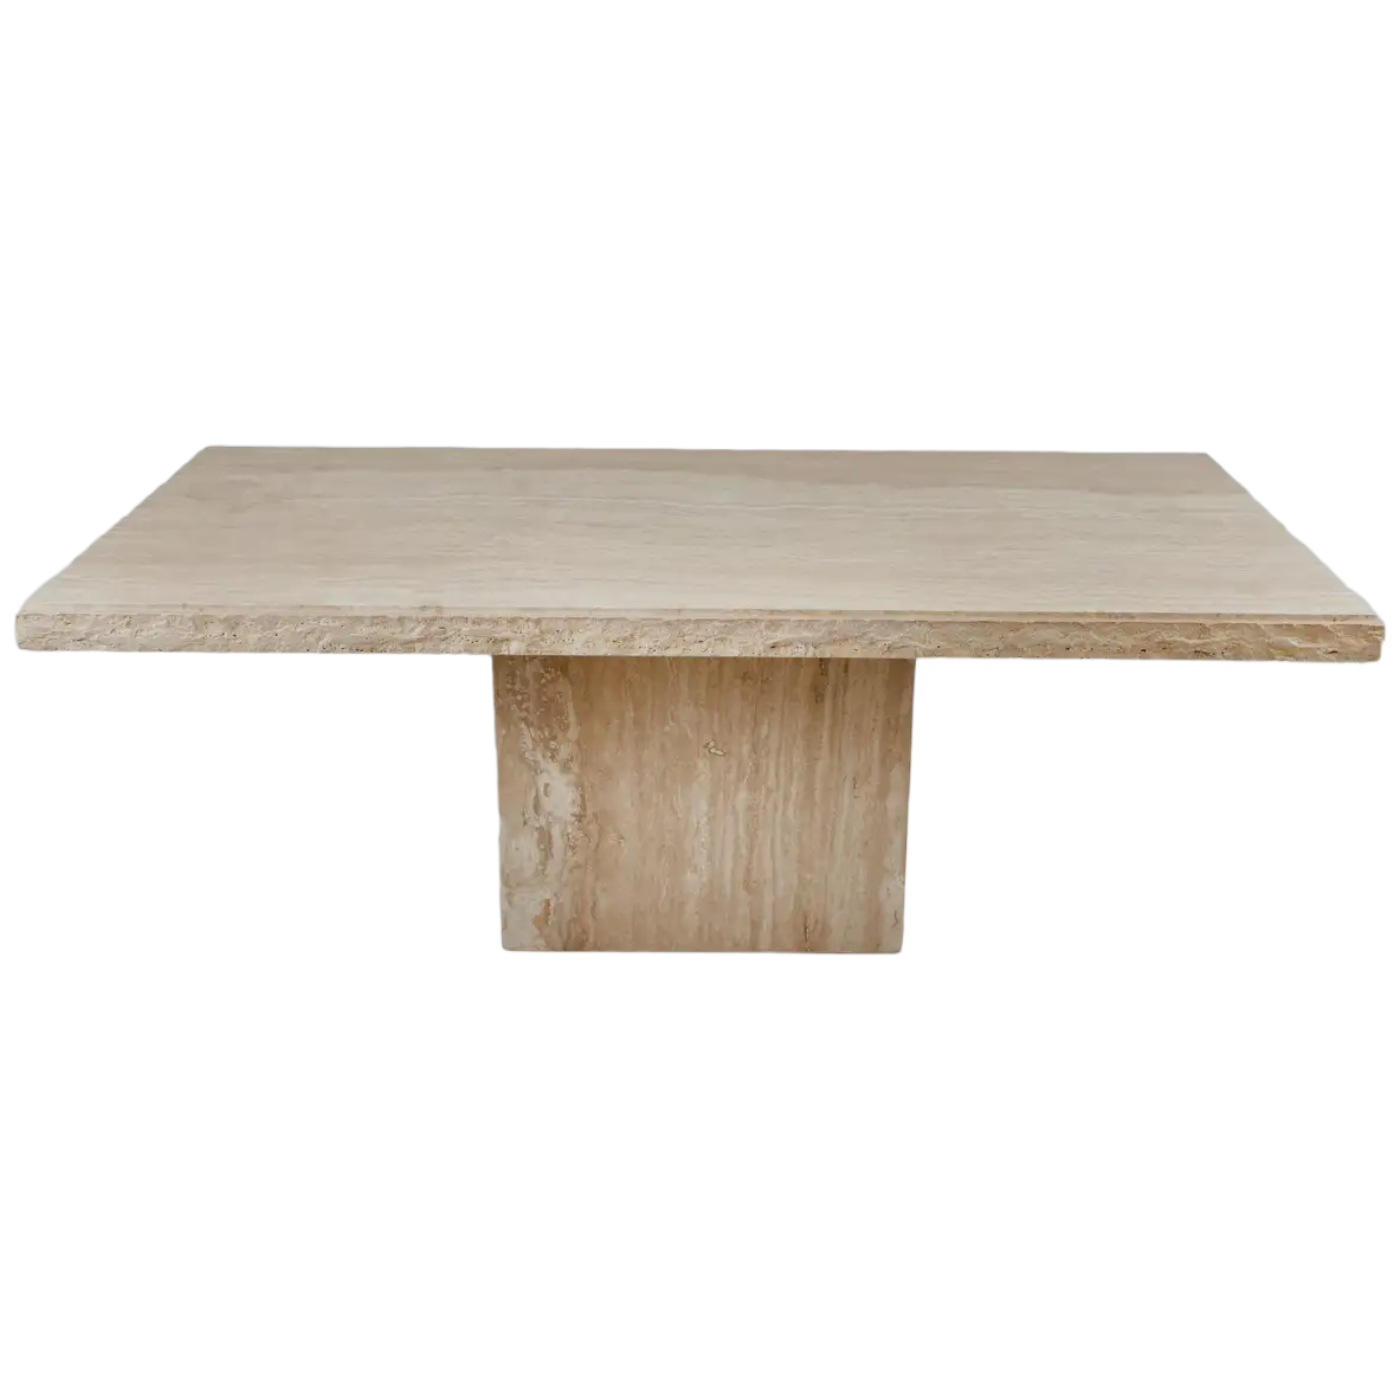 ROSA HAND CRAFTED ORGANIC TRAVERTINE DINING TABLE